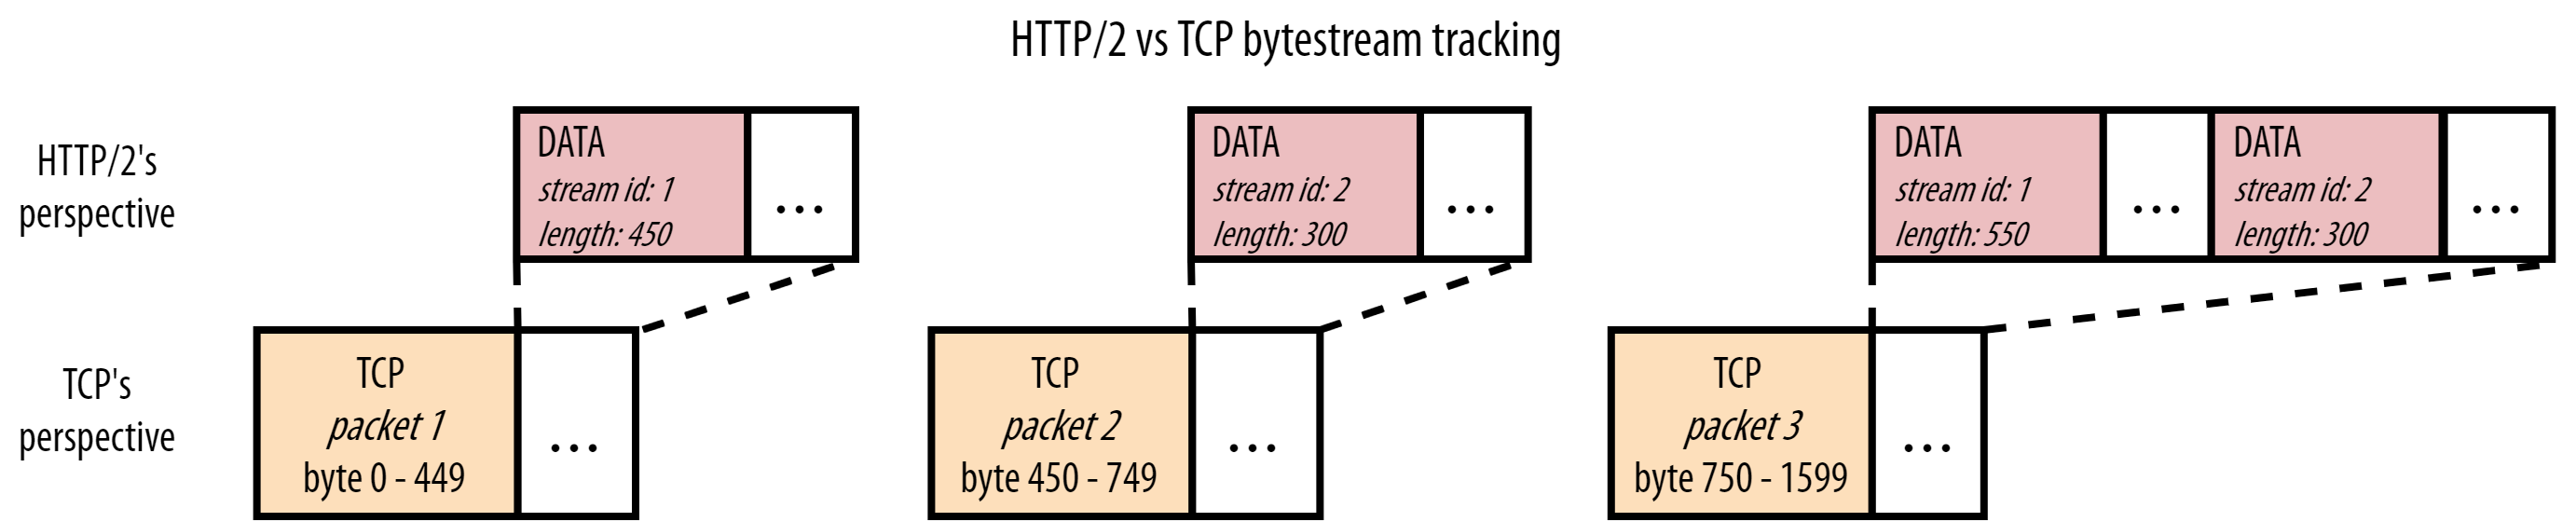 difference in perspective between HTTP/2 and TCP